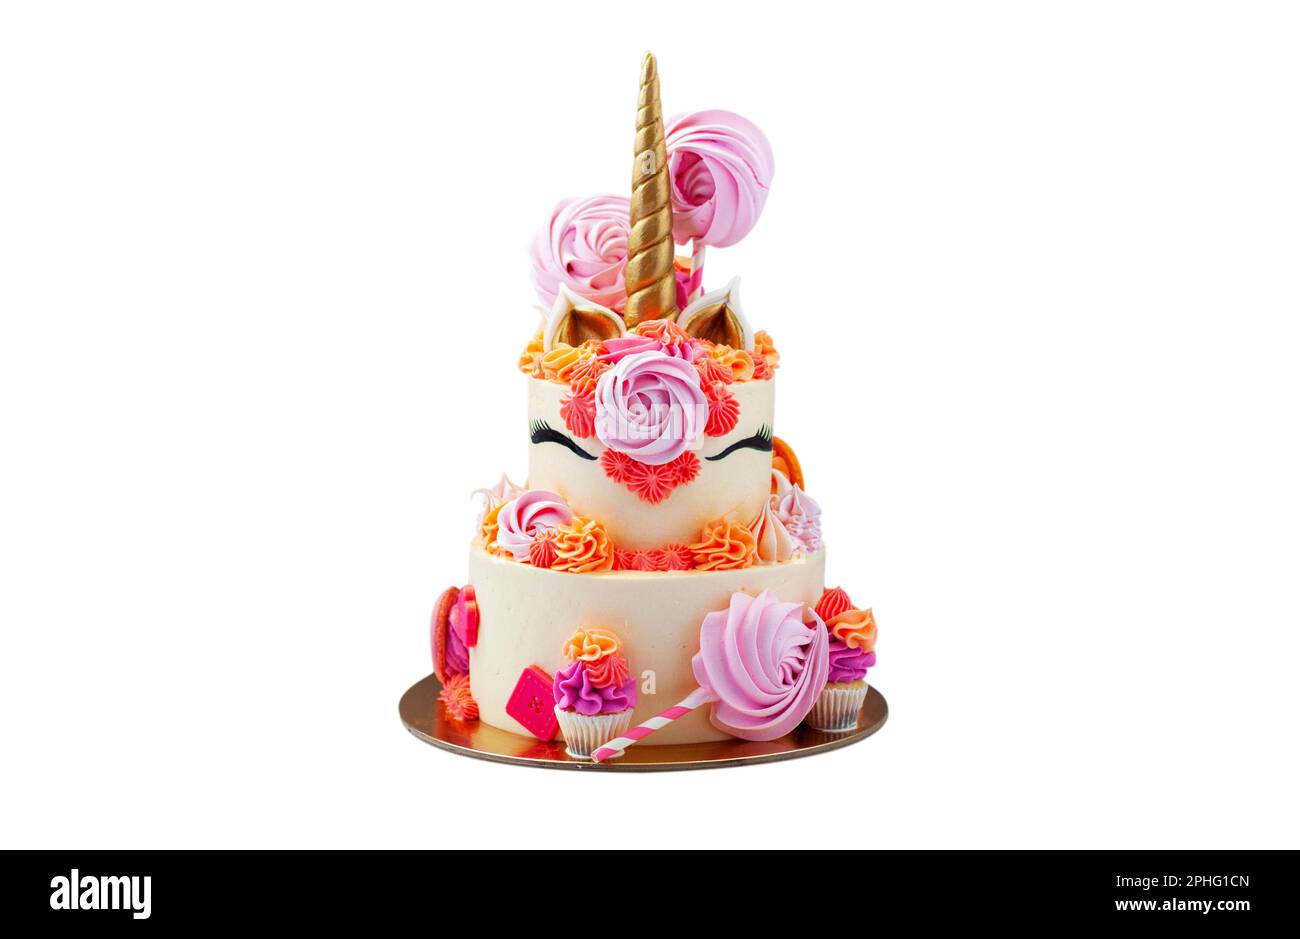 https://c8.alamy.com/comp/2PHG1CN/tall-and-bright-unicorn-cake-with-chocolate-meringue-swirls-and-cupcakes-isolated-on-white-background-with-copy-space-on-a-side-horizontal-2PHG1CN.jpg